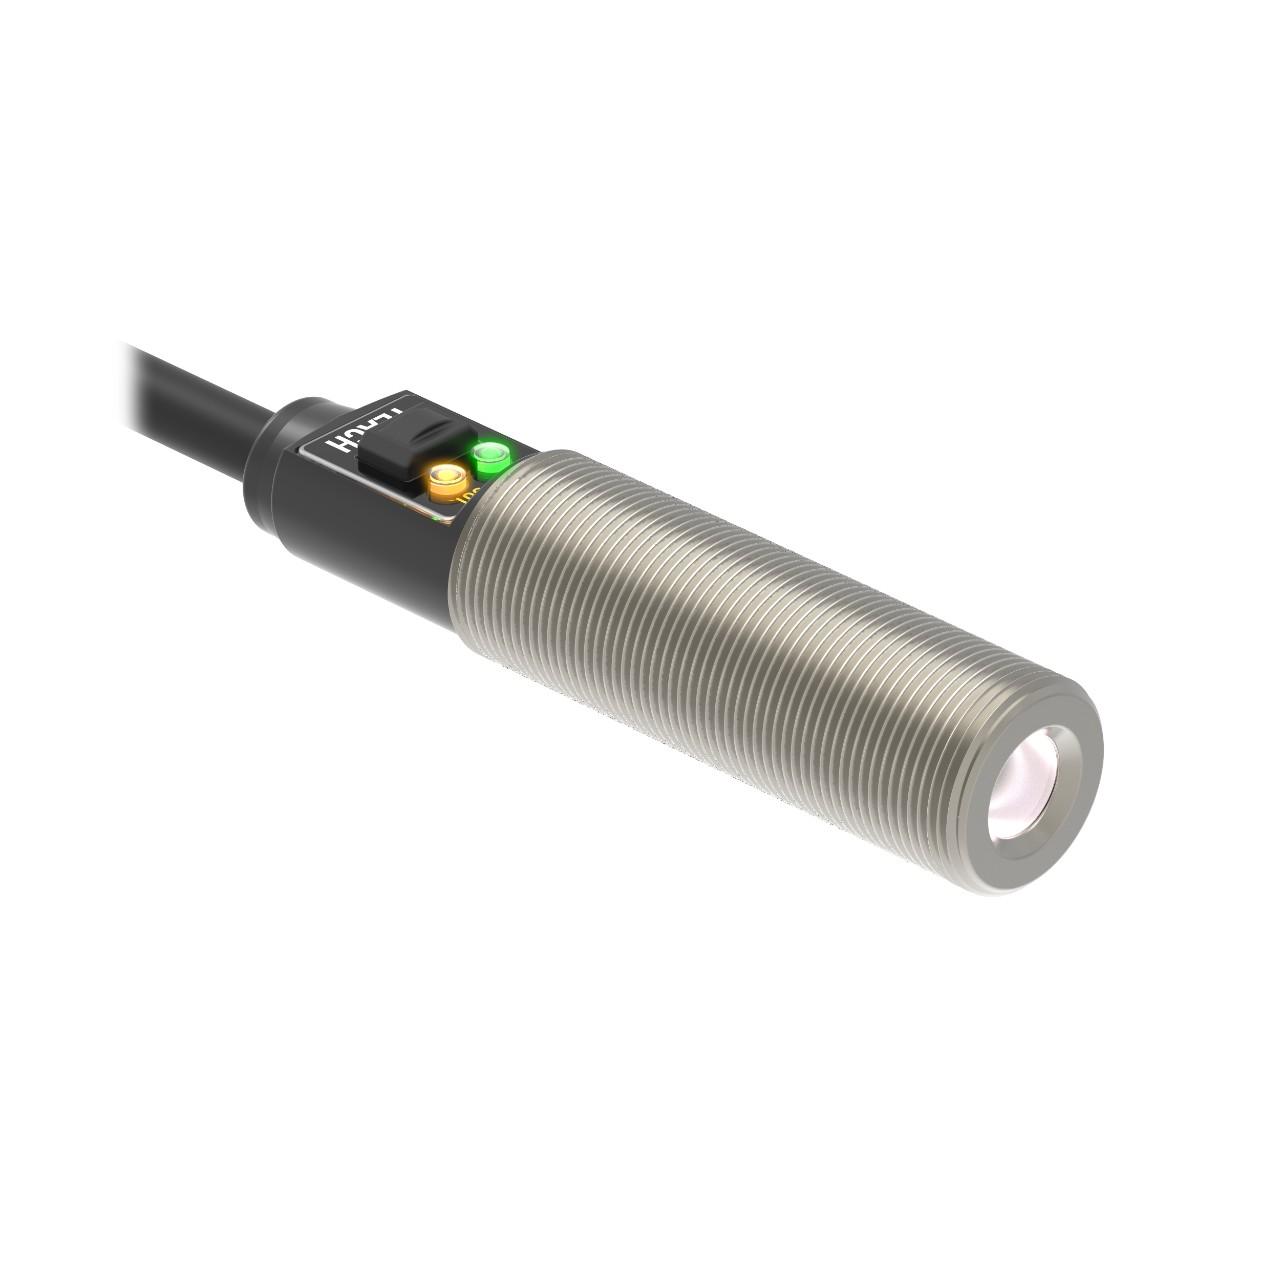 Banner M18TUP8 Non-contact Infrared (IR) temperature sensor/transmitter with integrated optical lns. + analog voltage output - Banner Engineering (T-GAGE series - M18T series) - Part #74915 - 0...+300°C measurement range - Infrared (IR) light - 1 x digital output (PNP t